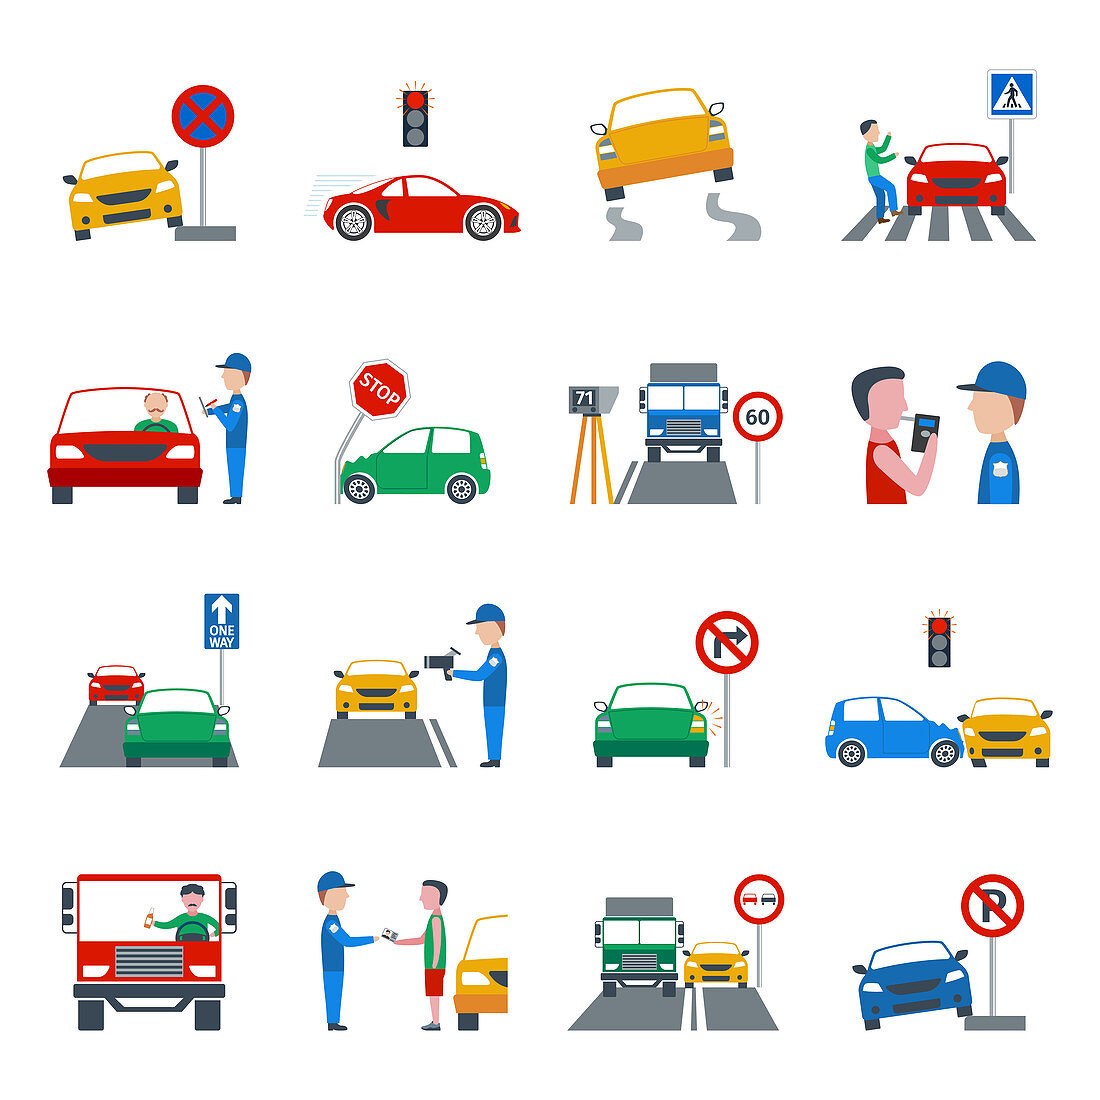 Traffic offence icons, illustration